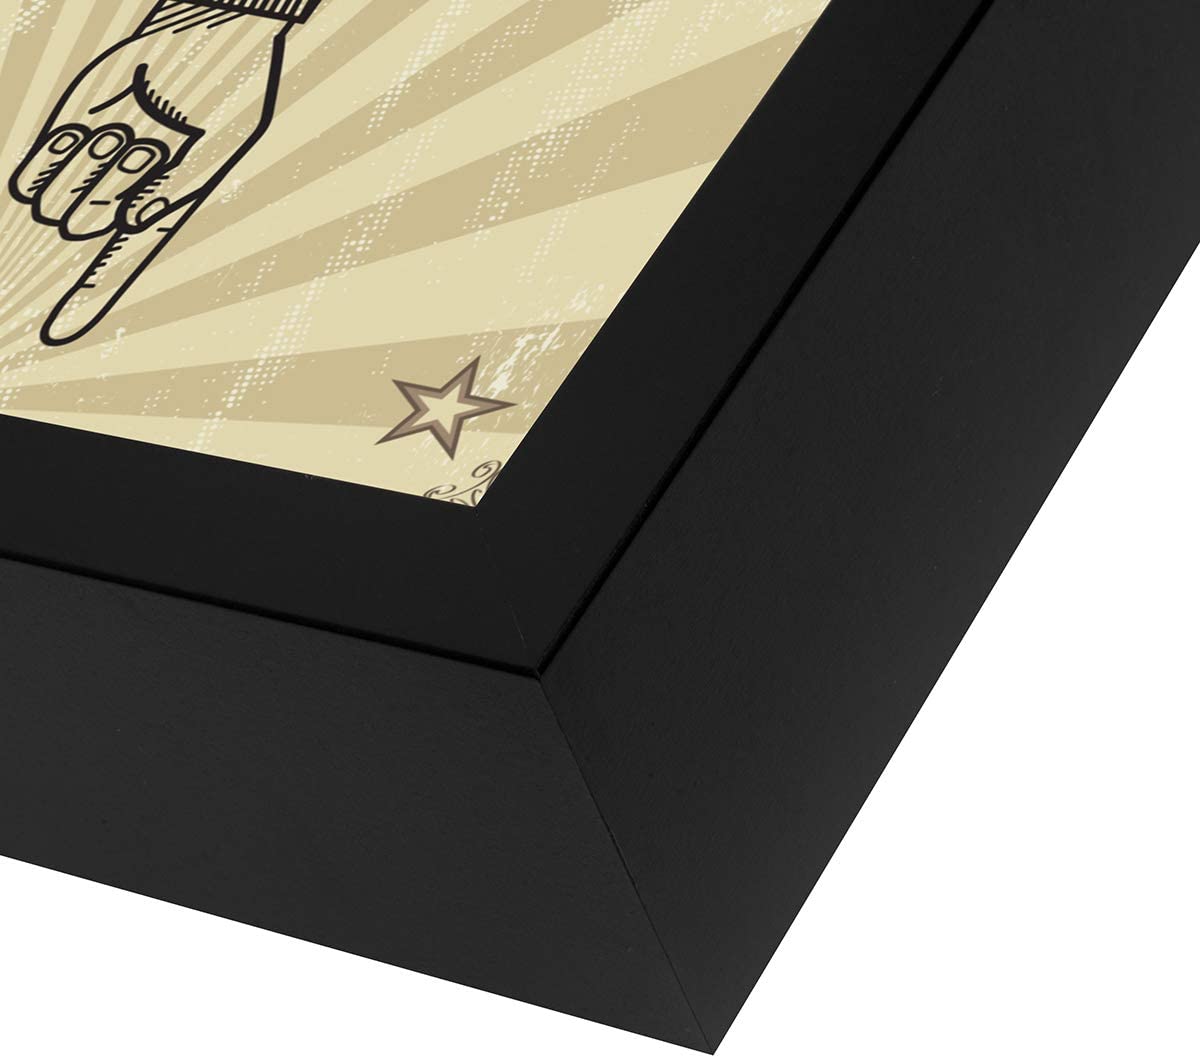 Drop Your Tickets Here Shadow Box Frame in Black with Polished Glass for Wall and Tabletop - 7" x 9" - Picture Frame - Americanflat